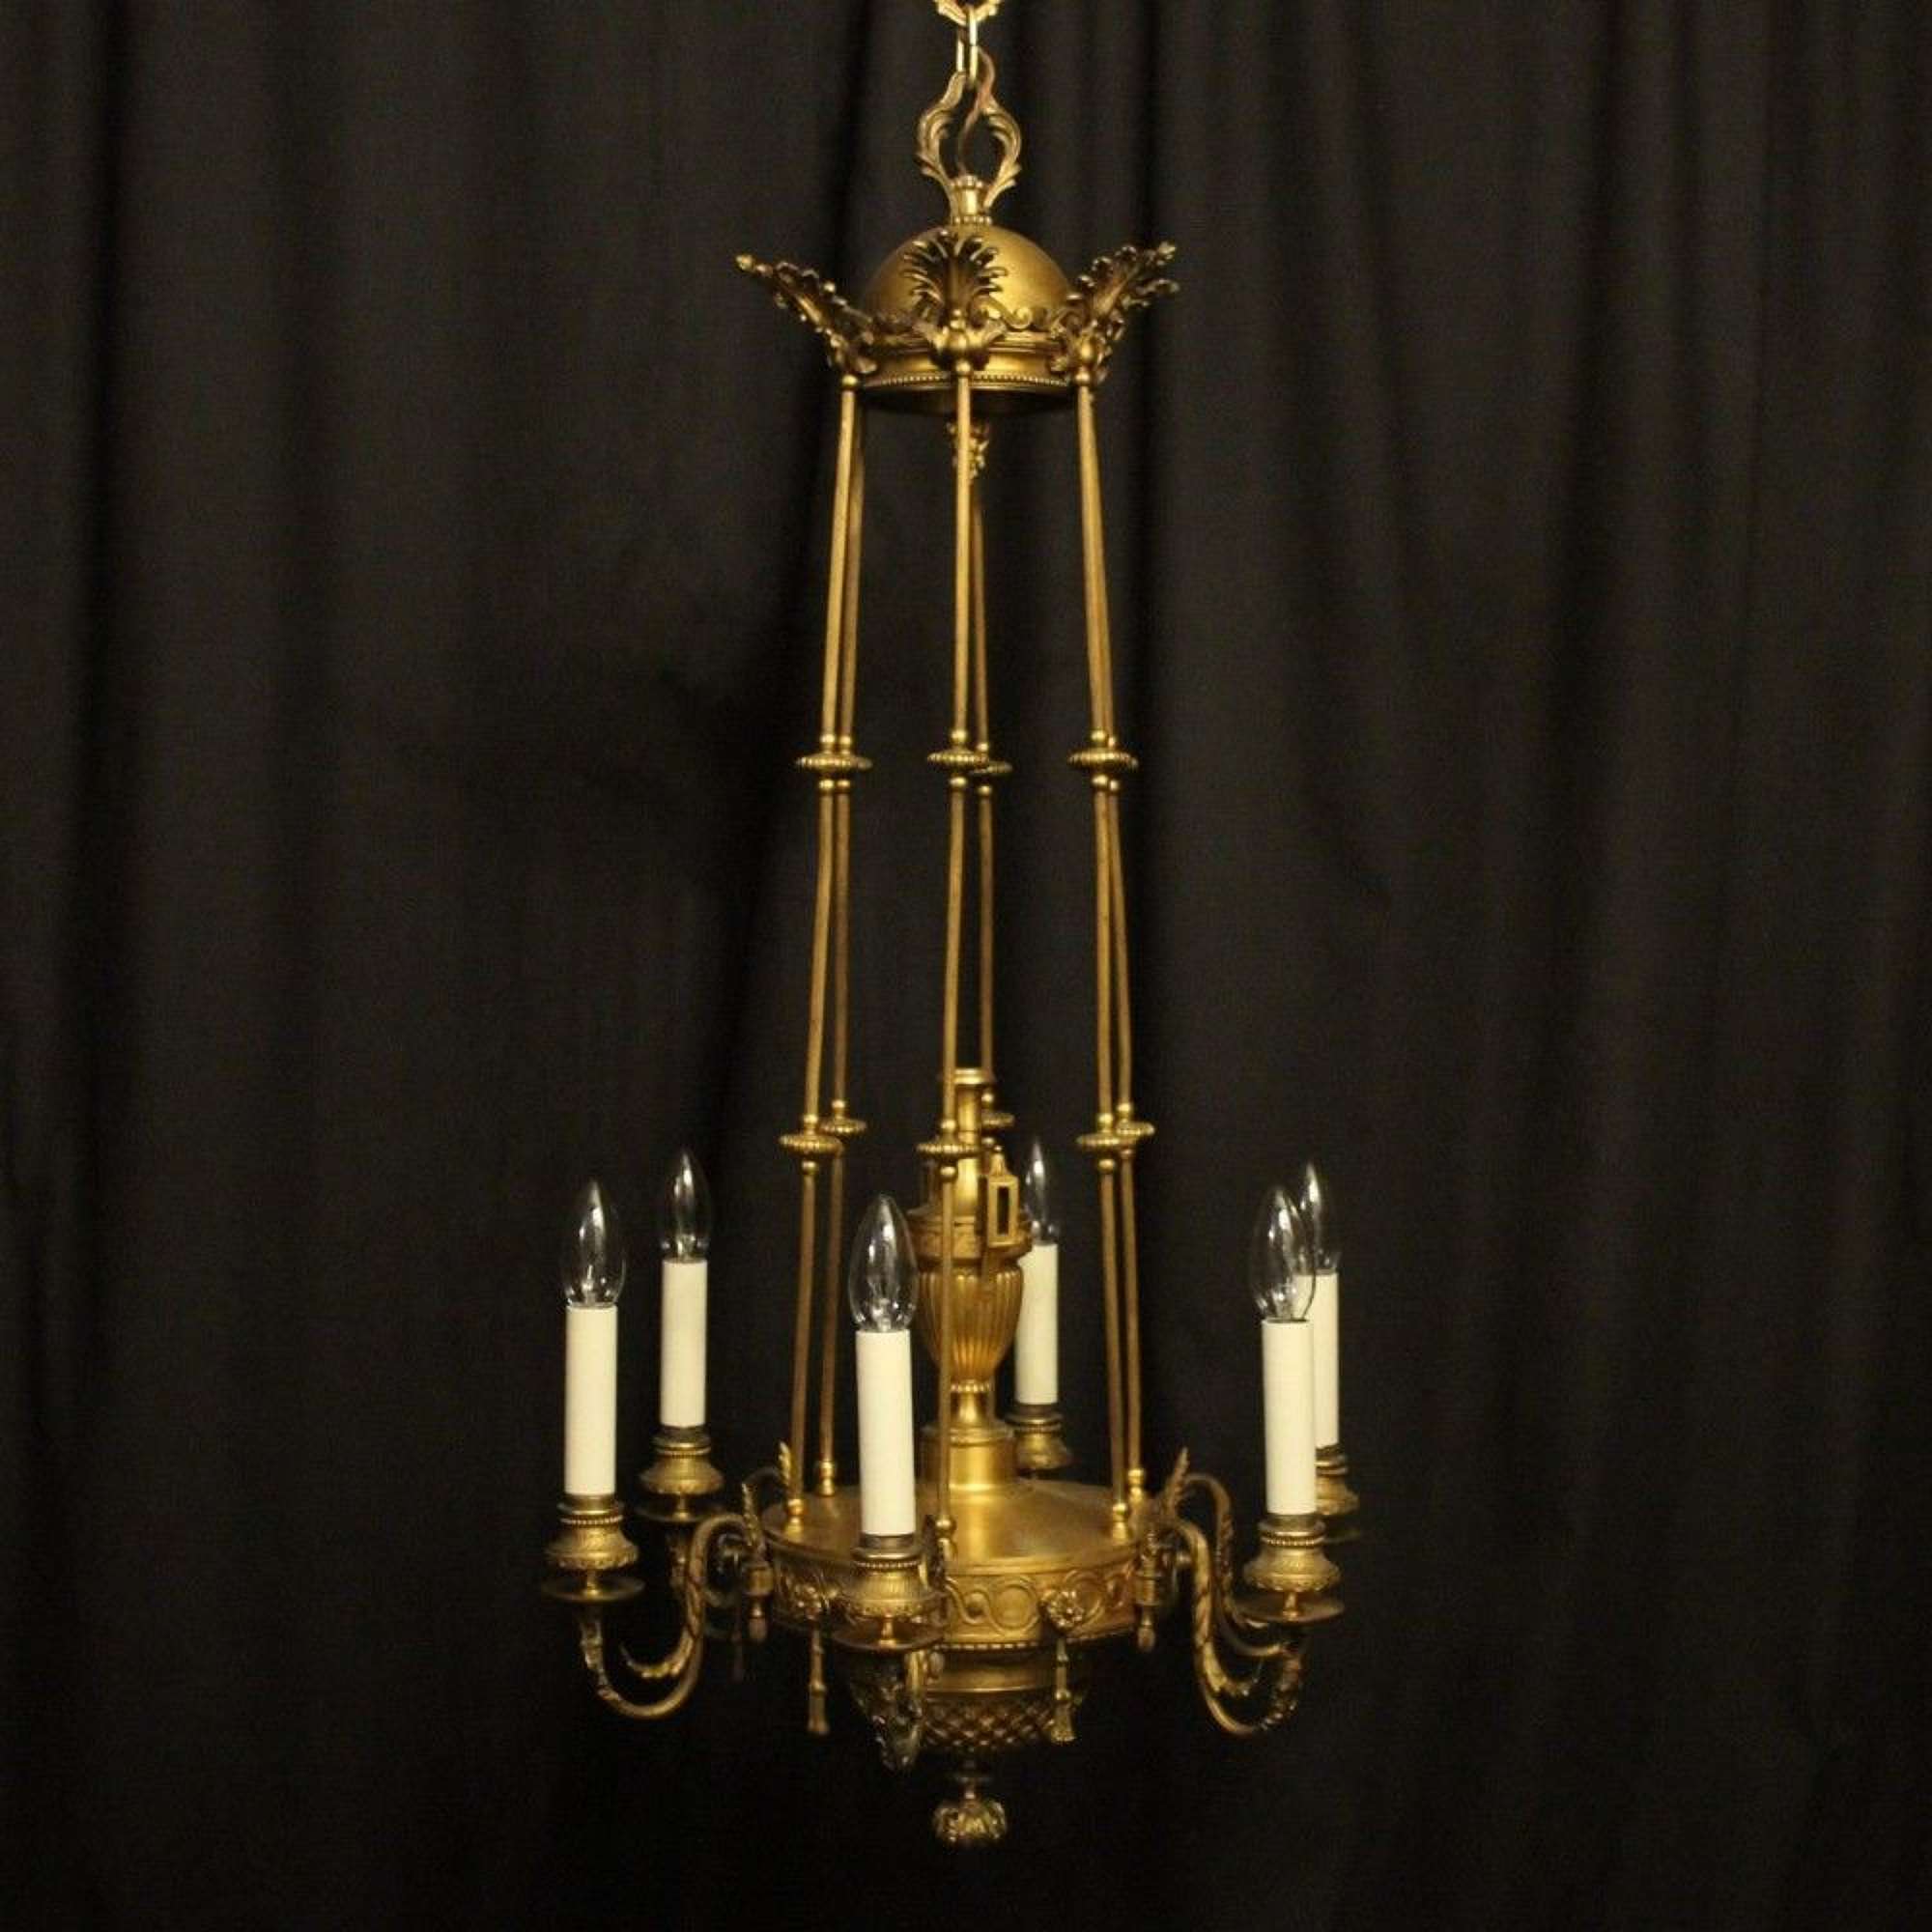 French F. Barbedienne Mid 19th C Antique Bronze 6 Light Chandelier